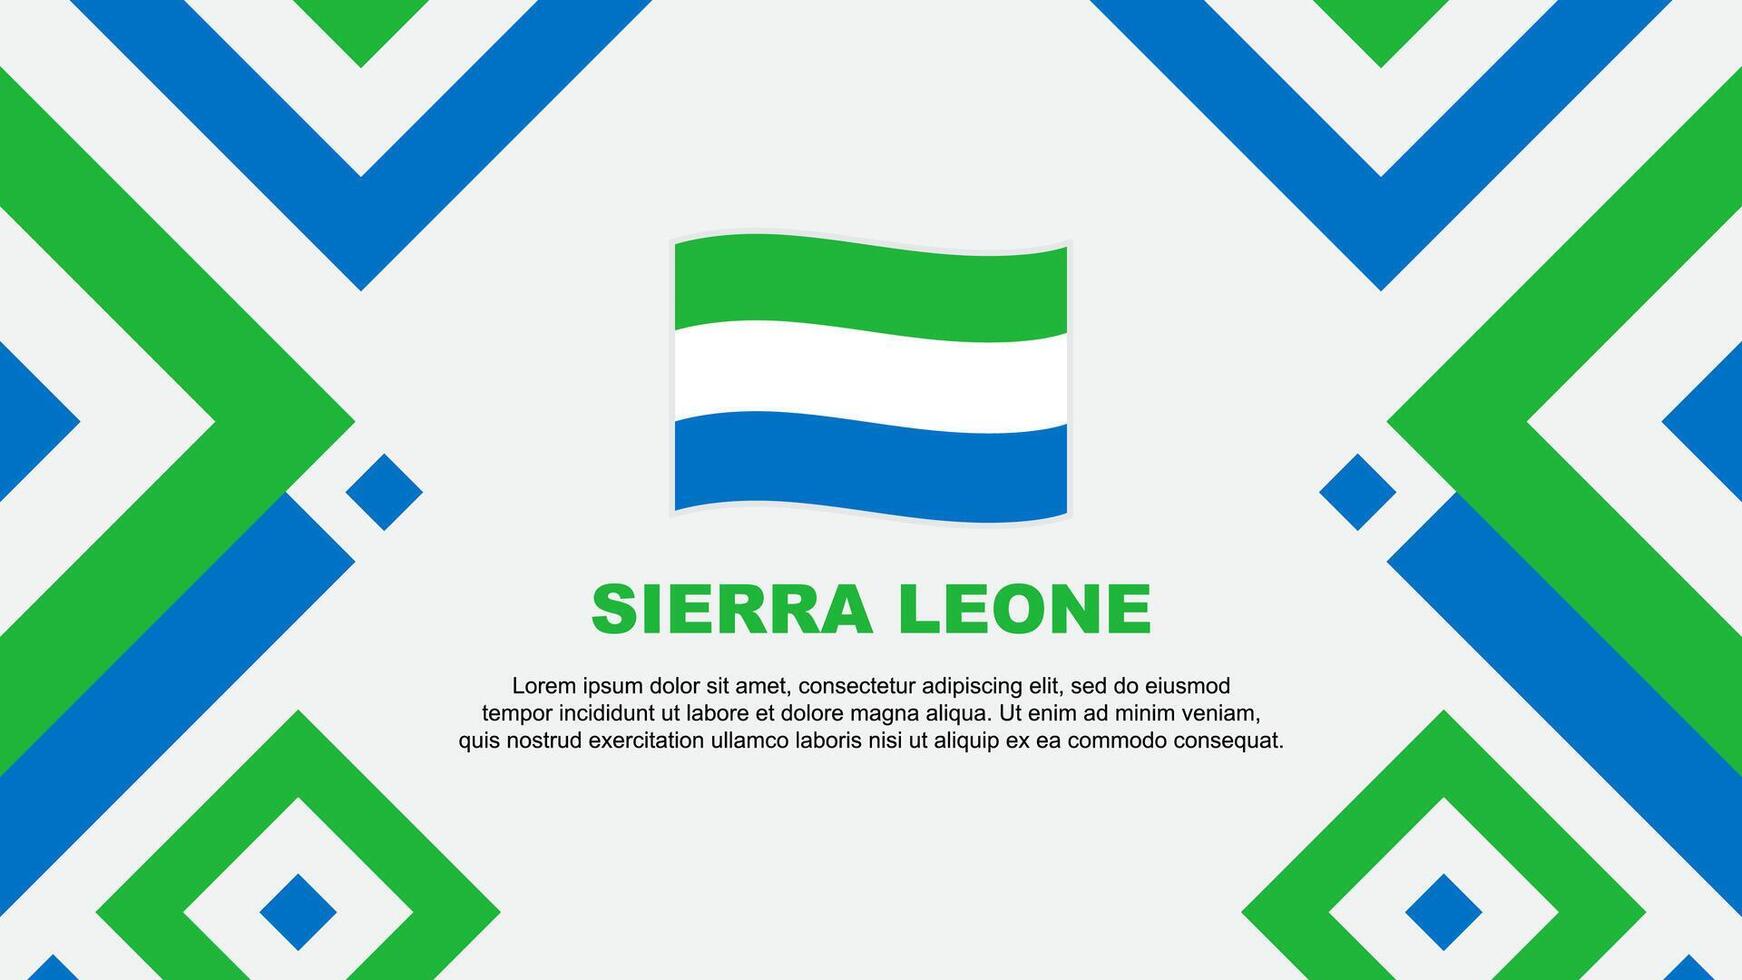 Sierra Leone Flag Abstract Background Design Template. Sierra Leone Independence Day Banner Wallpaper Vector Illustration. Sierra Leone Template